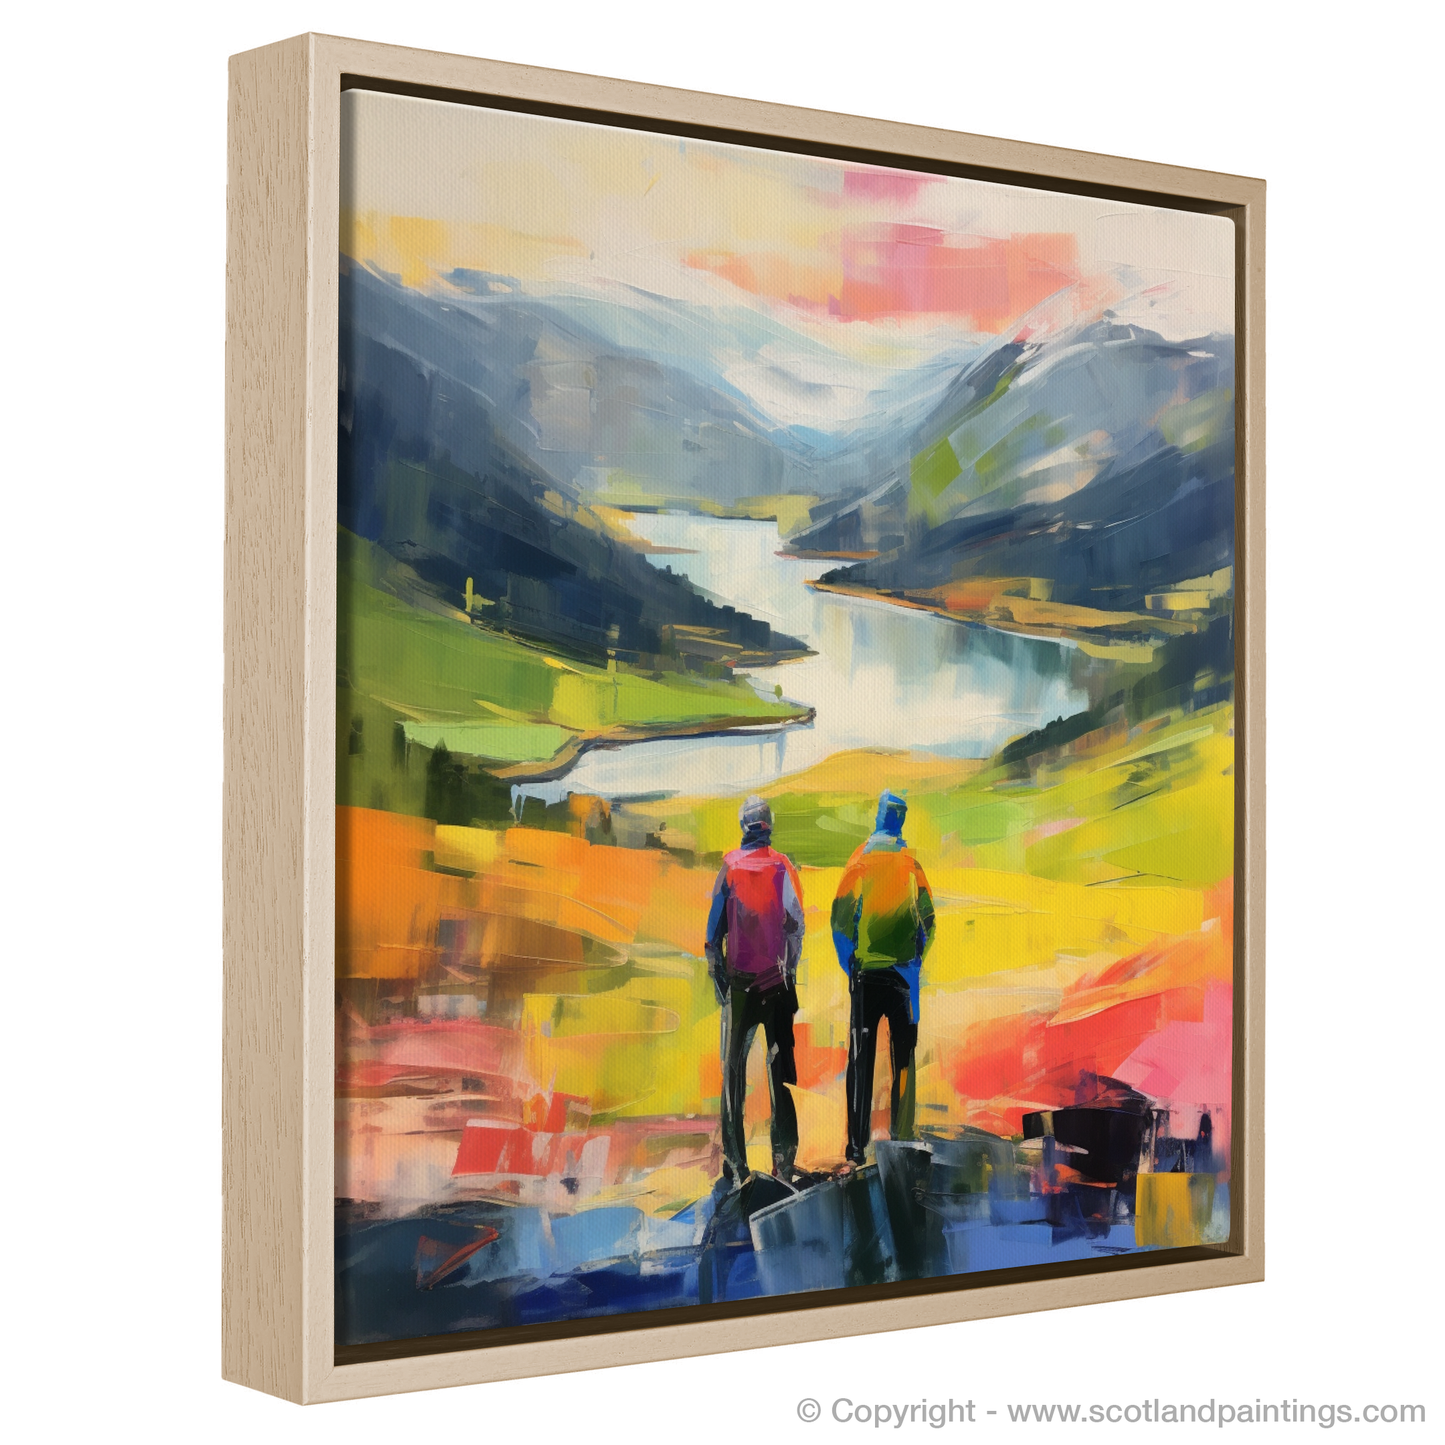 Painting and Art Print of Two hikers looking out on Loch Lomond entitled "Highland Vista: An Abstract View from Loch Lomond".